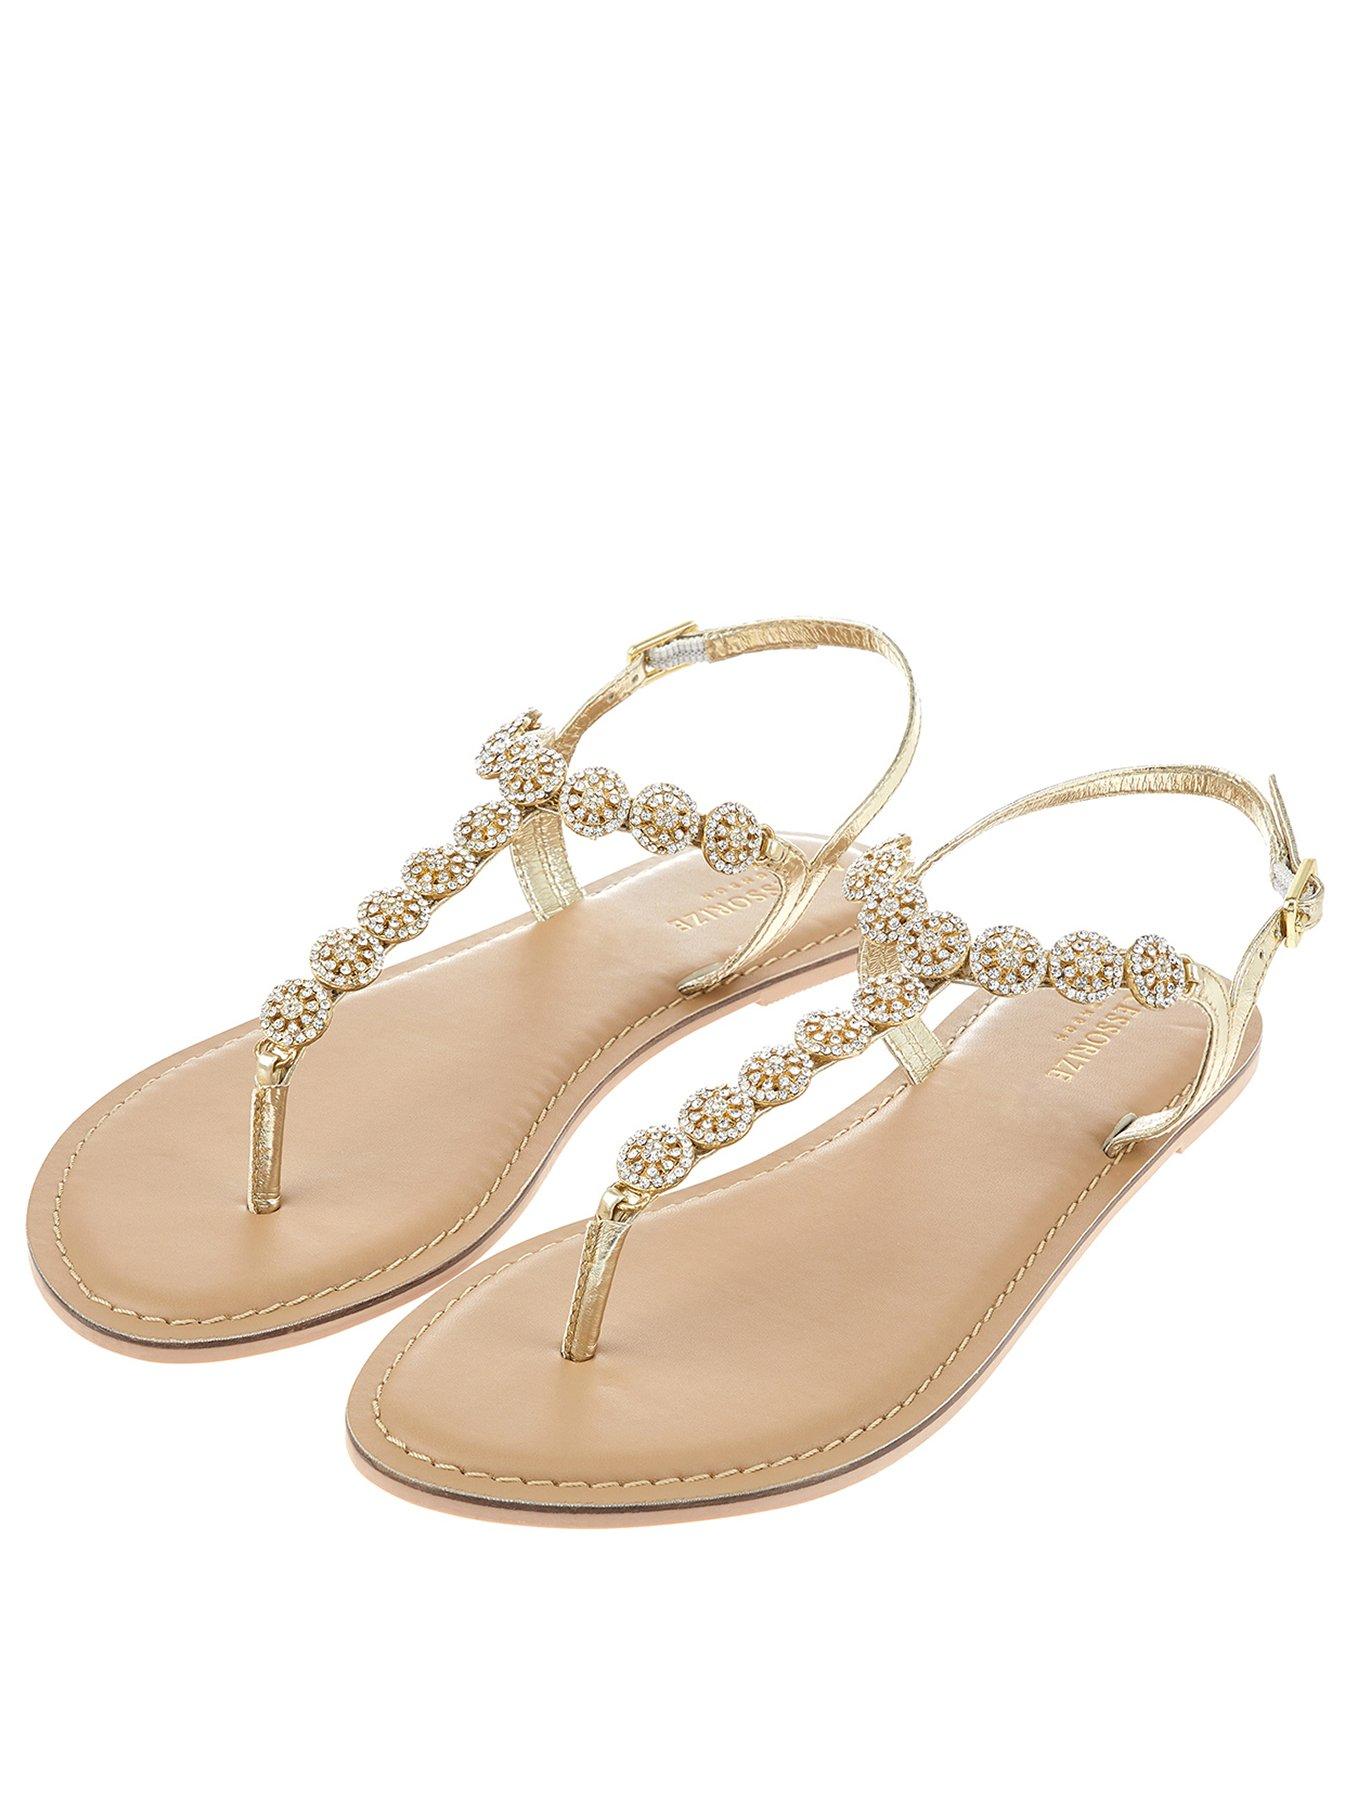 Shoes & boots Rome Embellished Sandal - Silver